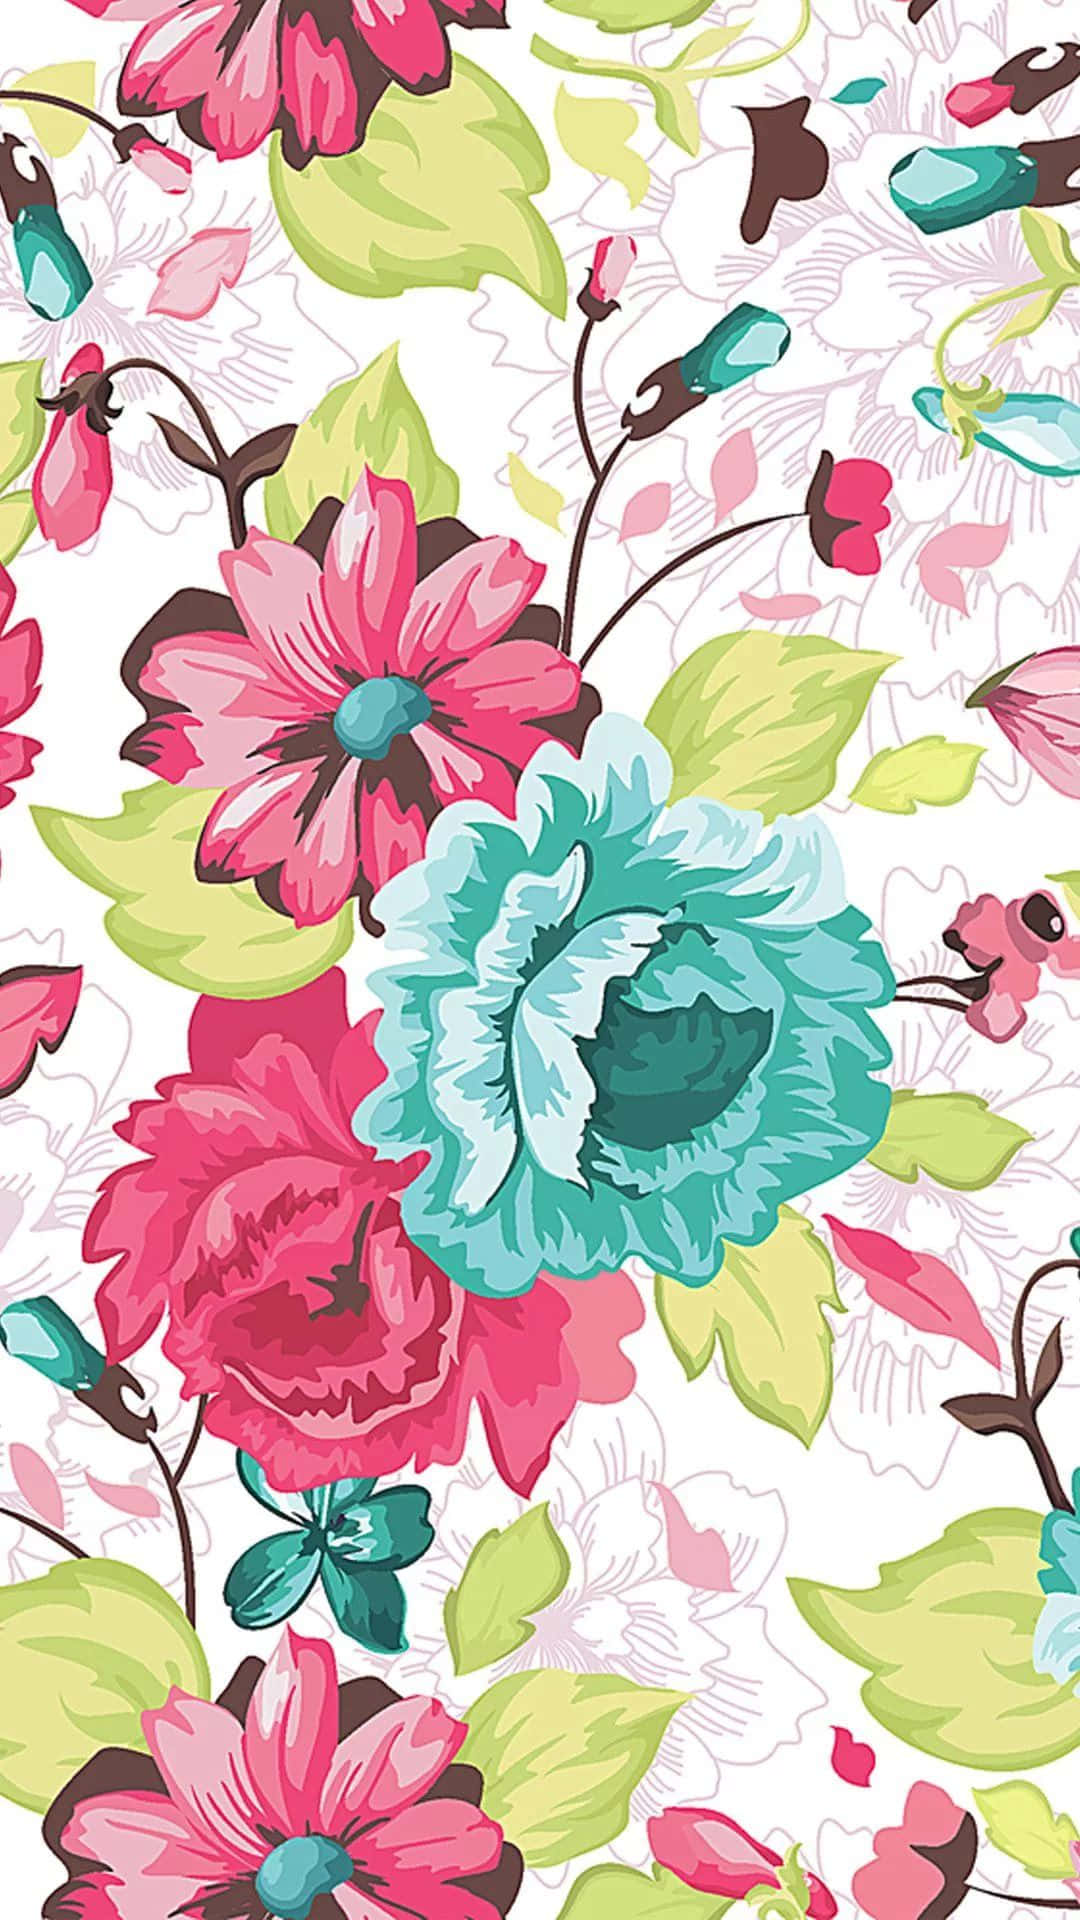 Enjoy the vibrant hues and prints of Lilly Pulitzer on your iPhone Wallpaper